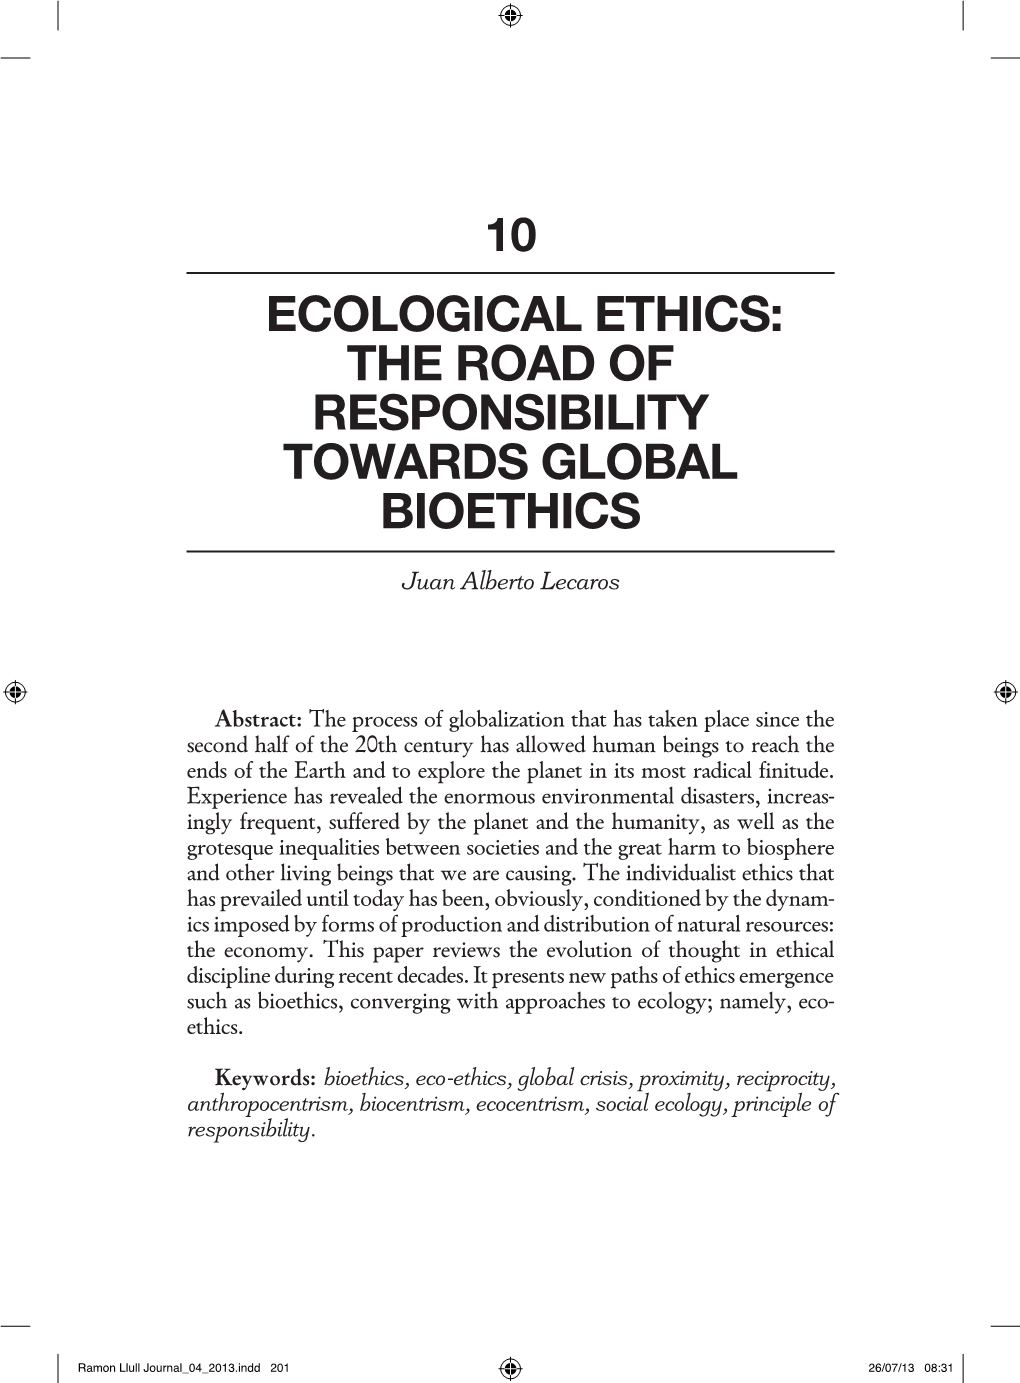 Ecological Ethics: the Road of Responsibility Towards Global Bioethics